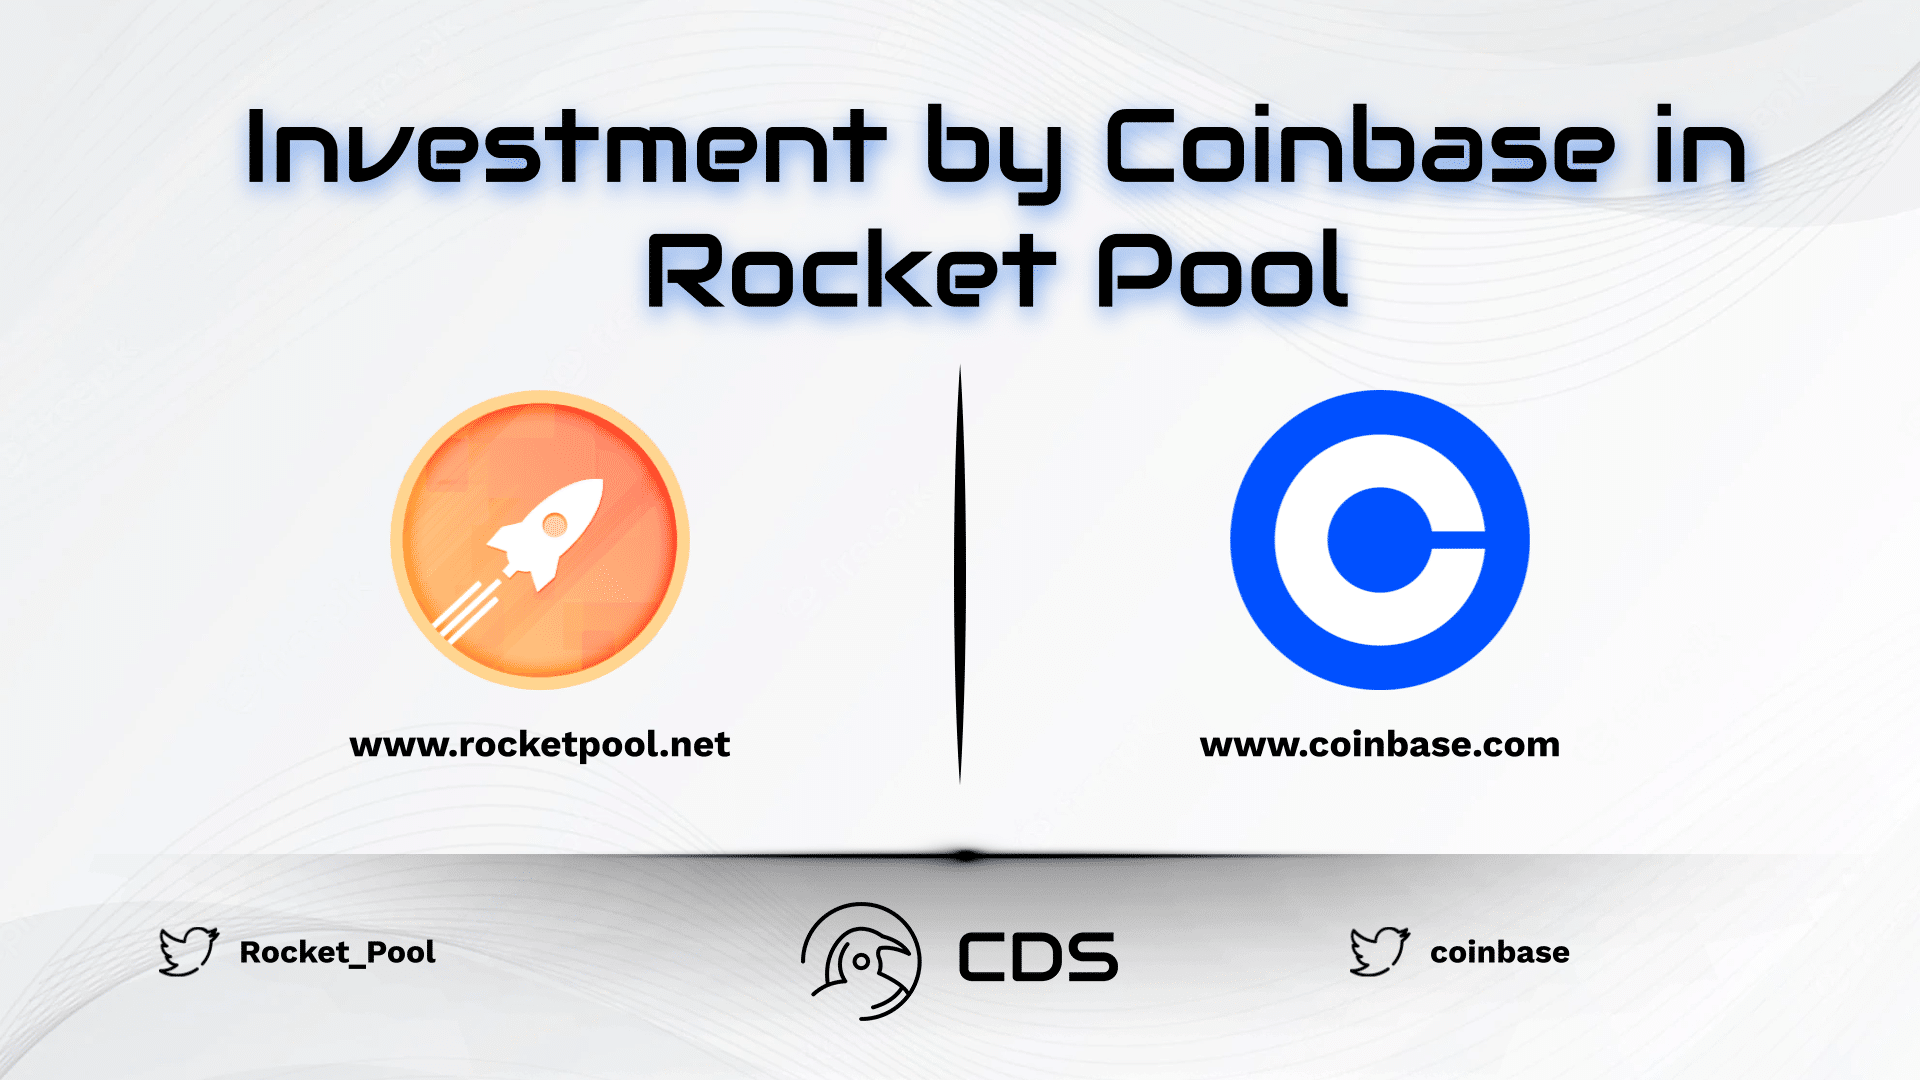 Investment by Coinbase in Rocket Pool